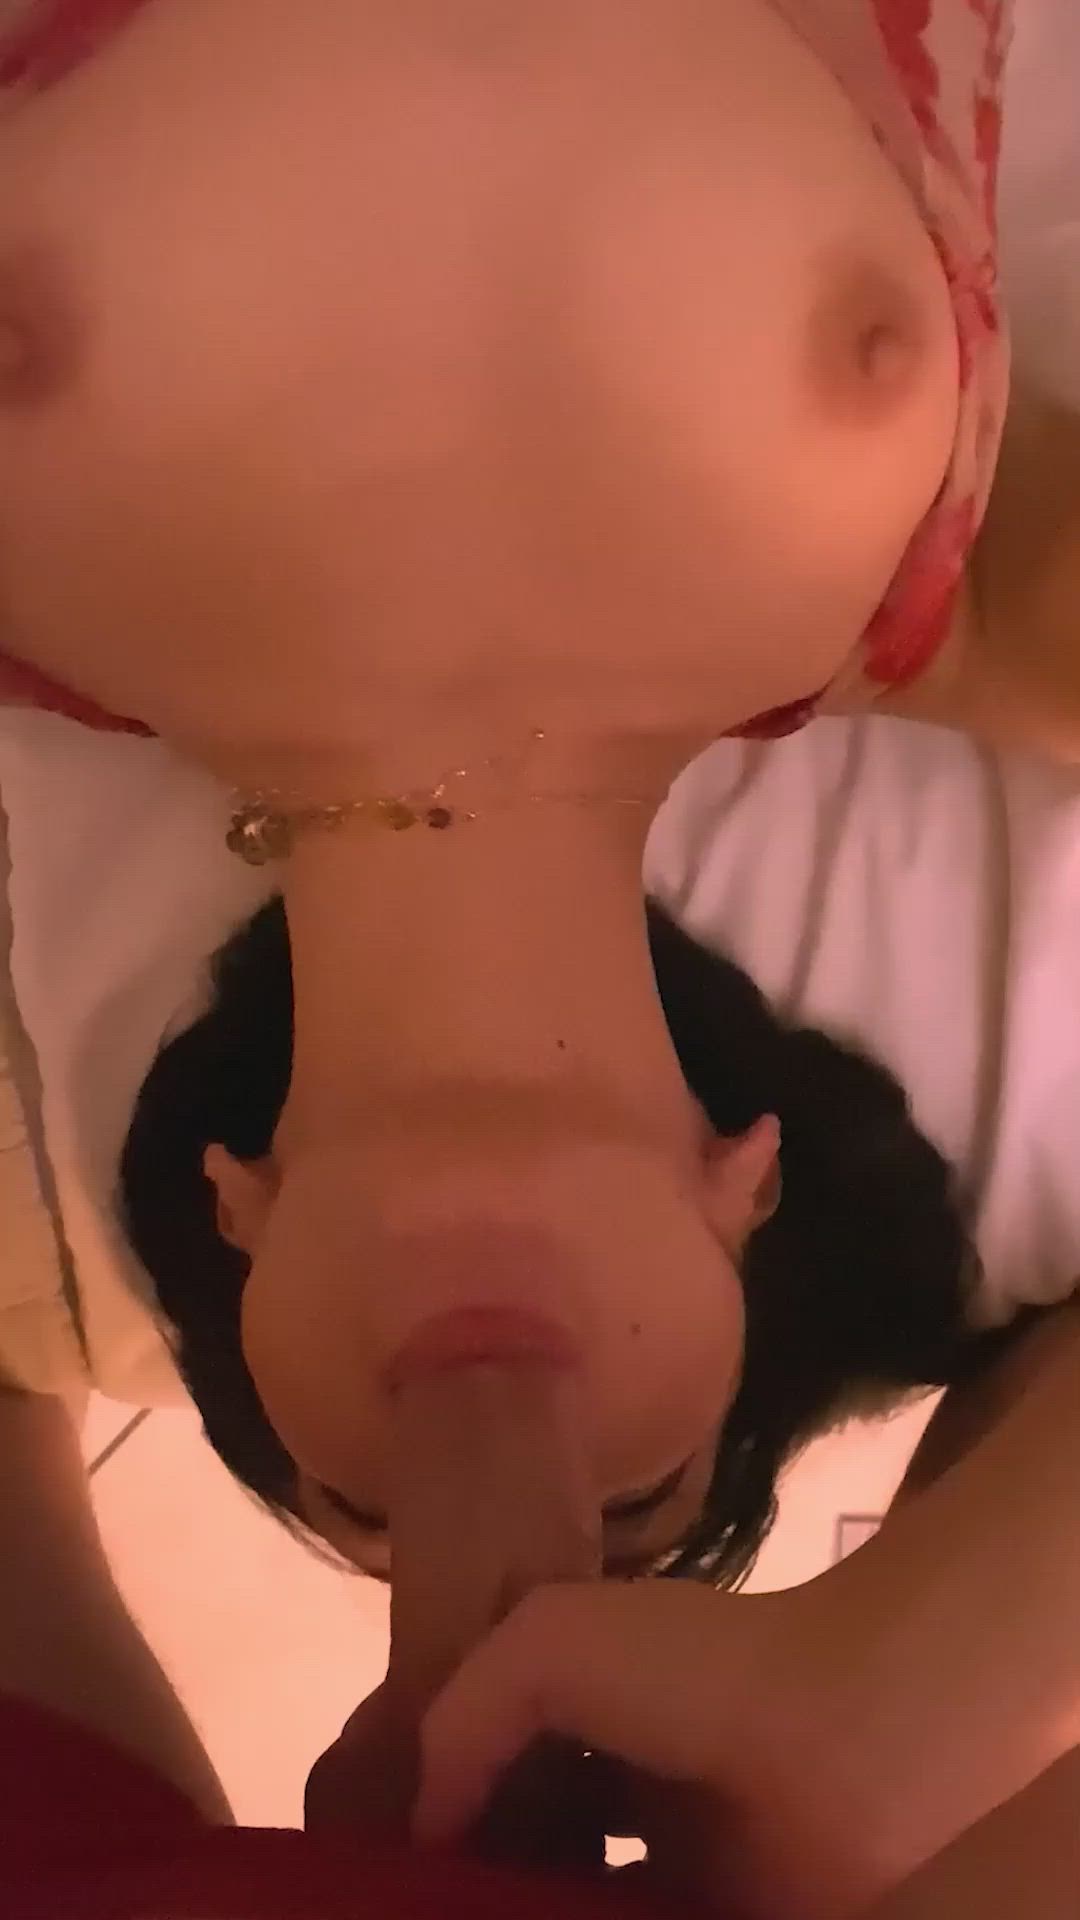 Teen porn video with onlyfans model Yumi Moon <strong>@yumiimoon</strong>